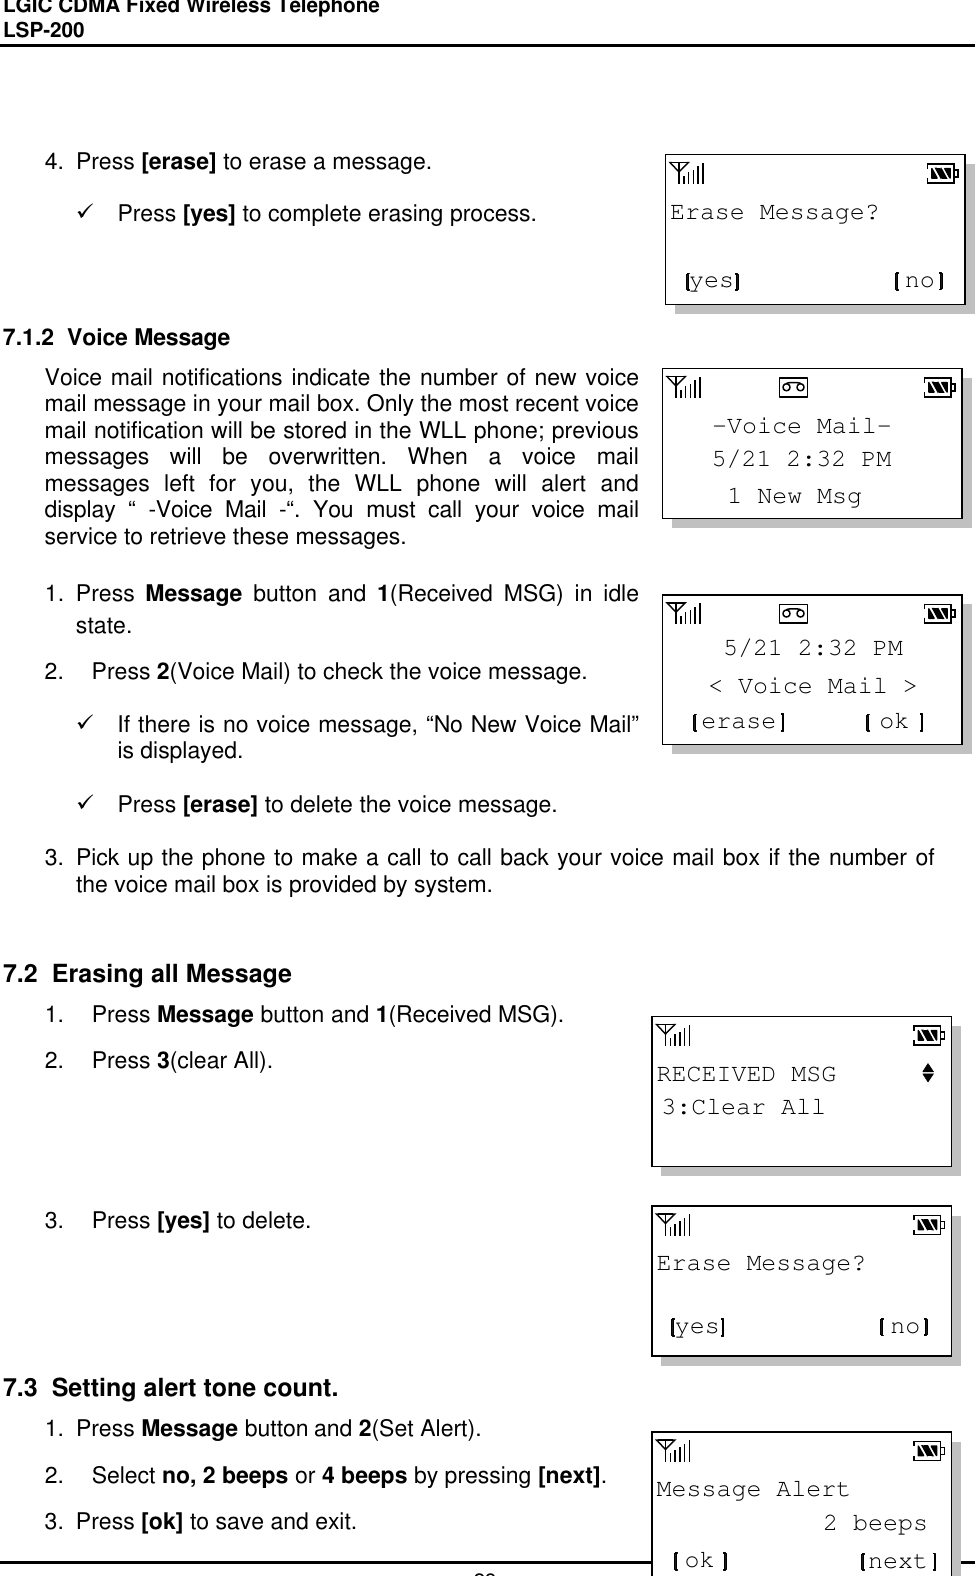 LGIC CDMA Fixed Wireless TelephoneLSP-20028RECEIVED MSG3:Clear AllMessage Alert           2 beepsok nextErase Message?yes no   -Voice Mail-    1 New Msg   5/21 2:32 PM  &lt; Voice Mail &gt;   5/21 2:32 PMerase okErase Message?yes no4. Press [erase] to erase a message.ü Press [yes] to complete erasing process.7.1.2  Voice MessageVoice mail notifications indicate the number of new voicemail message in your mail box. Only the most recent voicemail notification will be stored in the WLL phone; previousmessages will be overwritten. When a voice mailmessages left for you, the WLL phone will alert anddisplay “ -Voice Mail -“. You must call your voice mailservice to retrieve these messages.1. Press Message button and 1(Received MSG) in idlestate.2. Press 2(Voice Mail) to check the voice message.ü If there is no voice message, “No New Voice Mail”is displayed.ü Press [erase] to delete the voice message.3. Pick up the phone to make a call to call back your voice mail box if the number ofthe voice mail box is provided by system.7.2  Erasing all Message1. Press Message button and 1(Received MSG).2. Press 3(clear All).3. Press [yes] to delete.7.3  Setting alert tone count.1. Press Message button and 2(Set Alert).2. Select no, 2 beeps or 4 beeps by pressing [next].3. Press [ok] to save and exit.